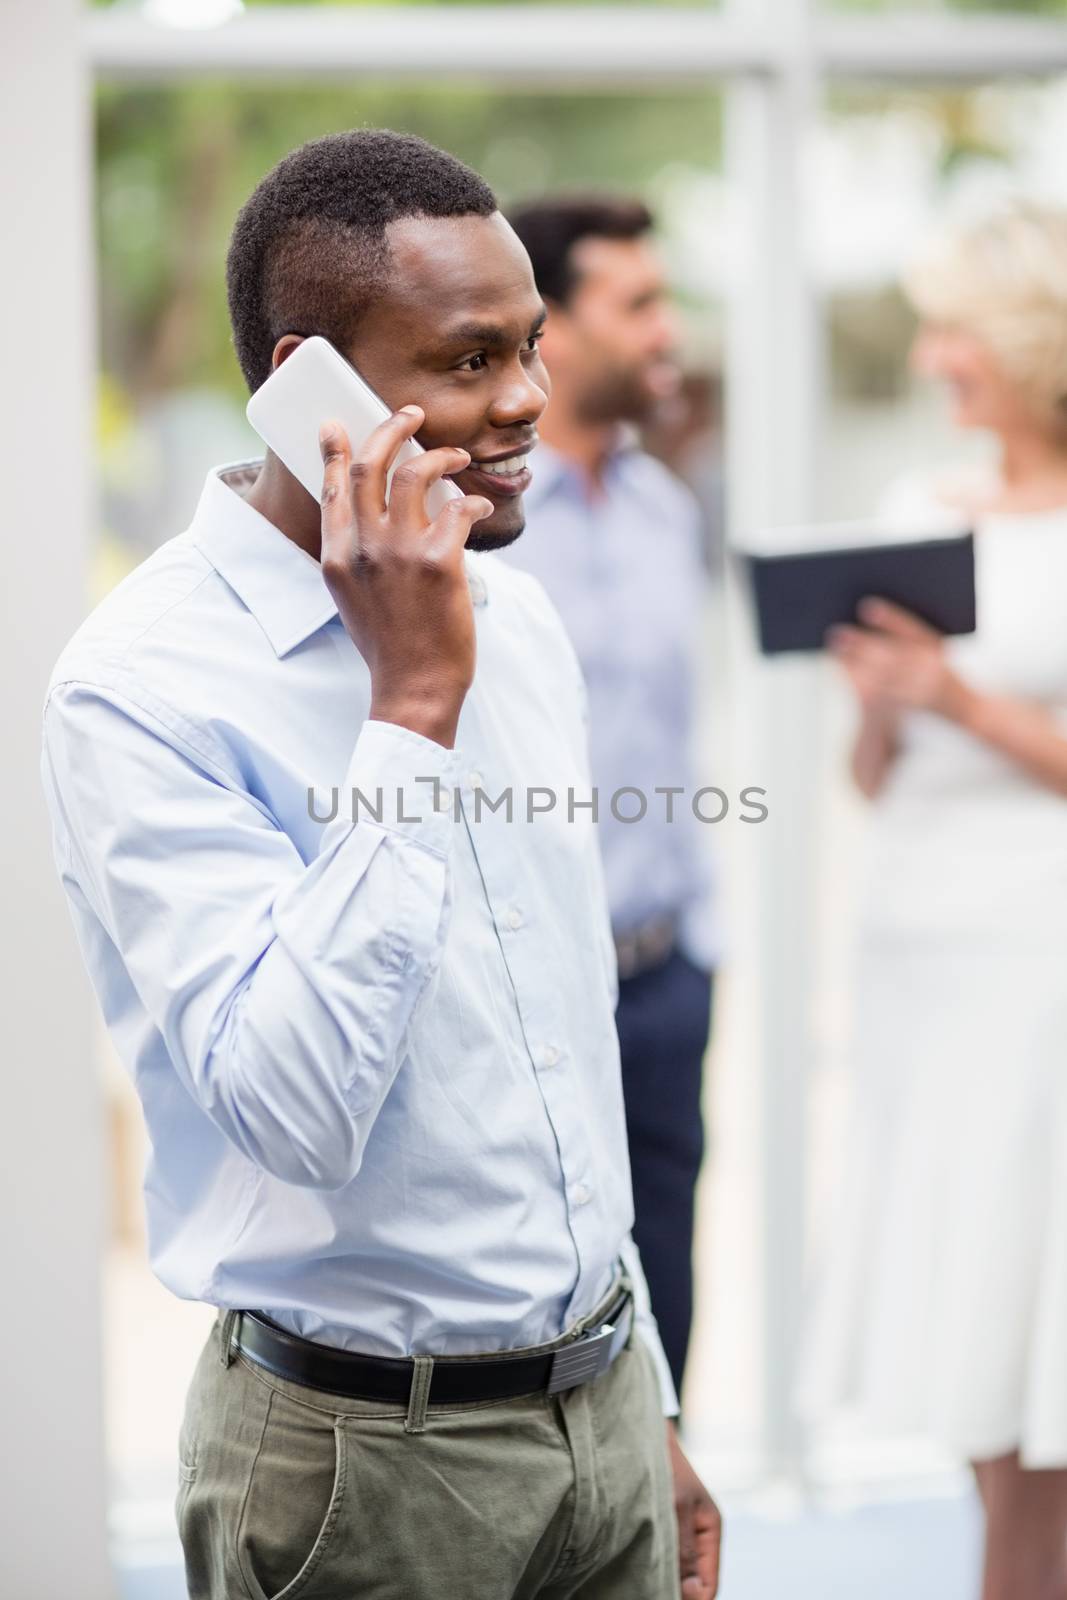 Happy businessman talking on mobile phone